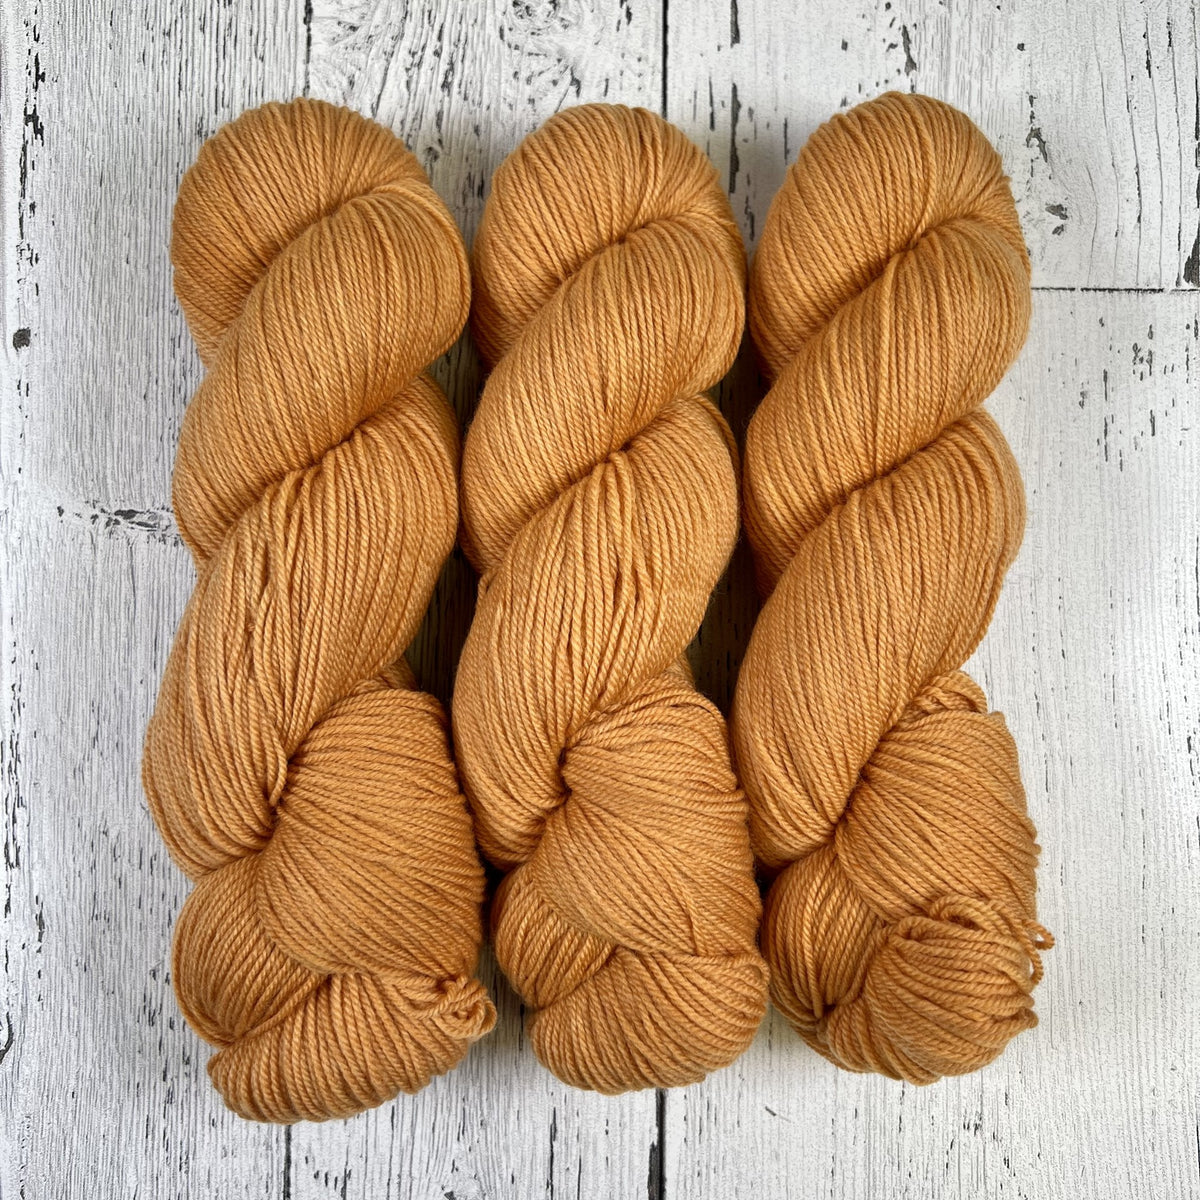 Apricot in Worsted Weight